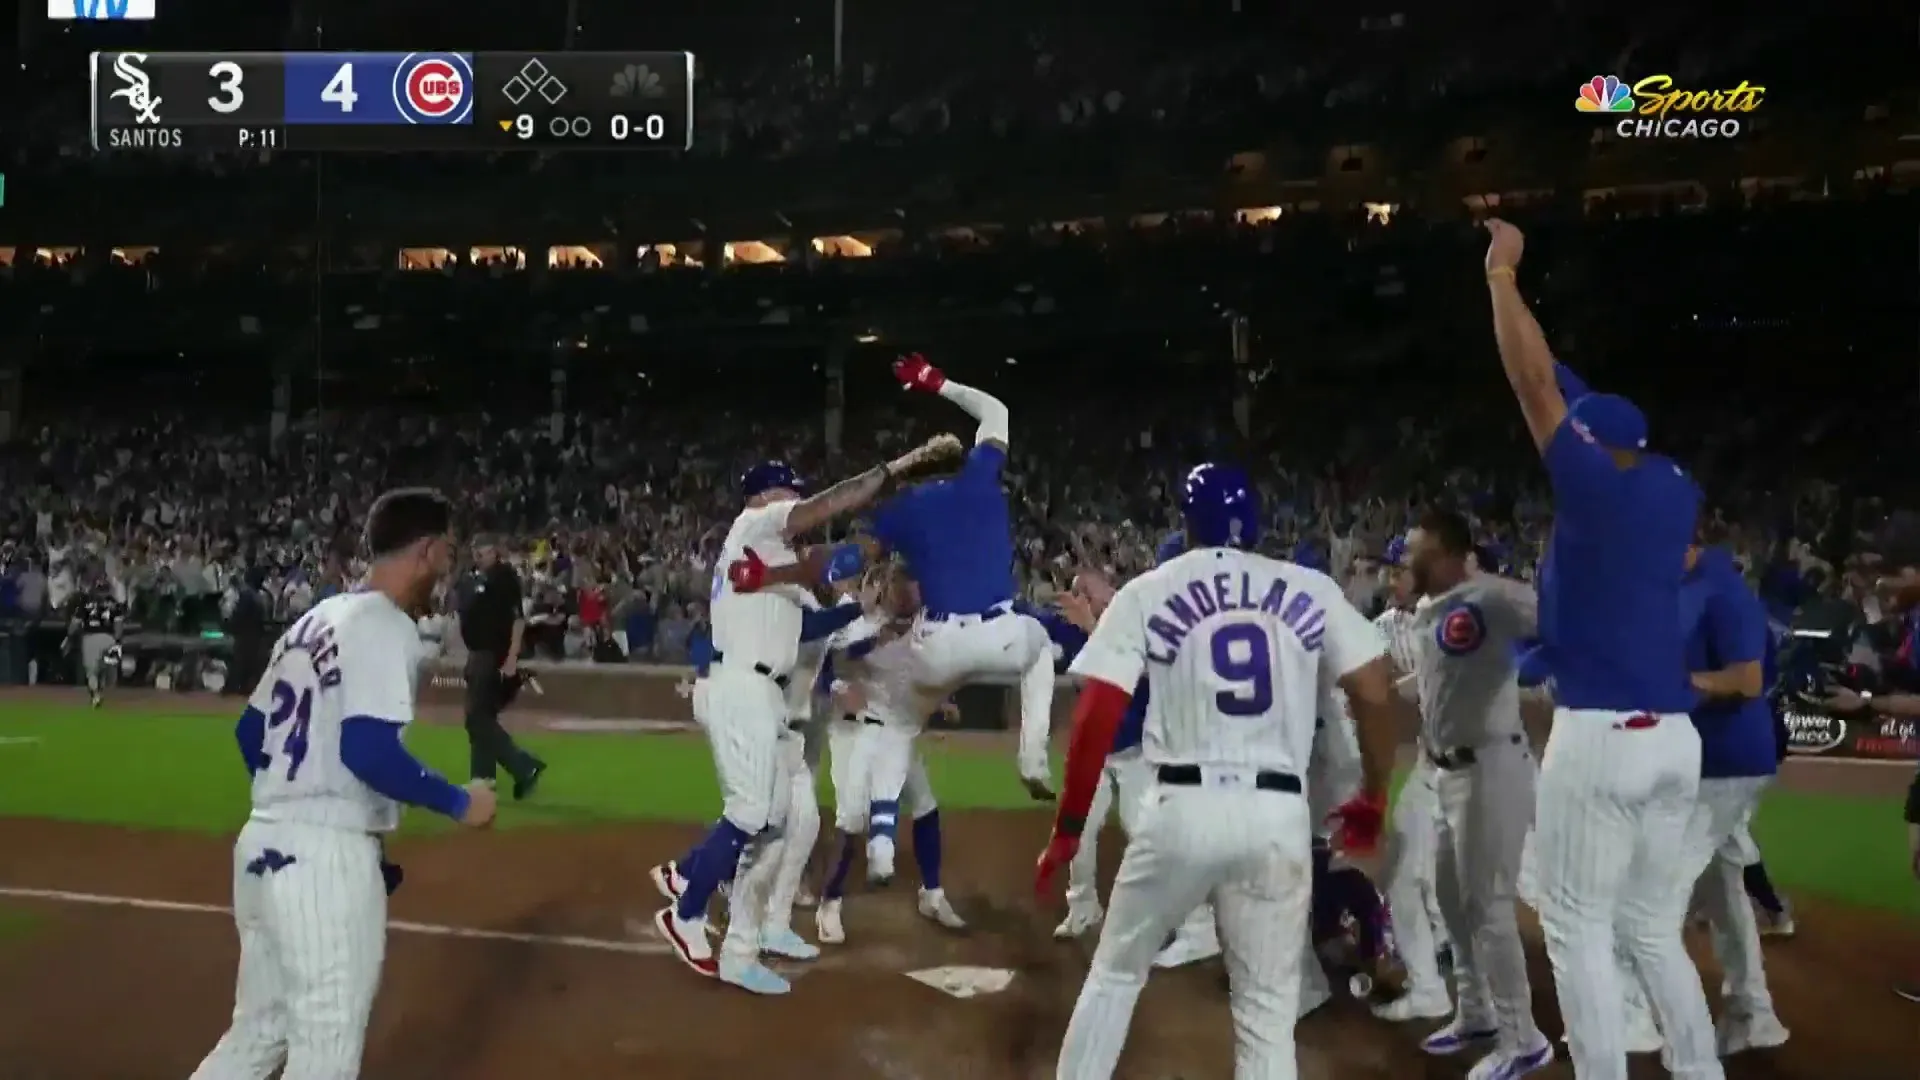 Chicago Cubs: Christopher Morel's home run a special moment